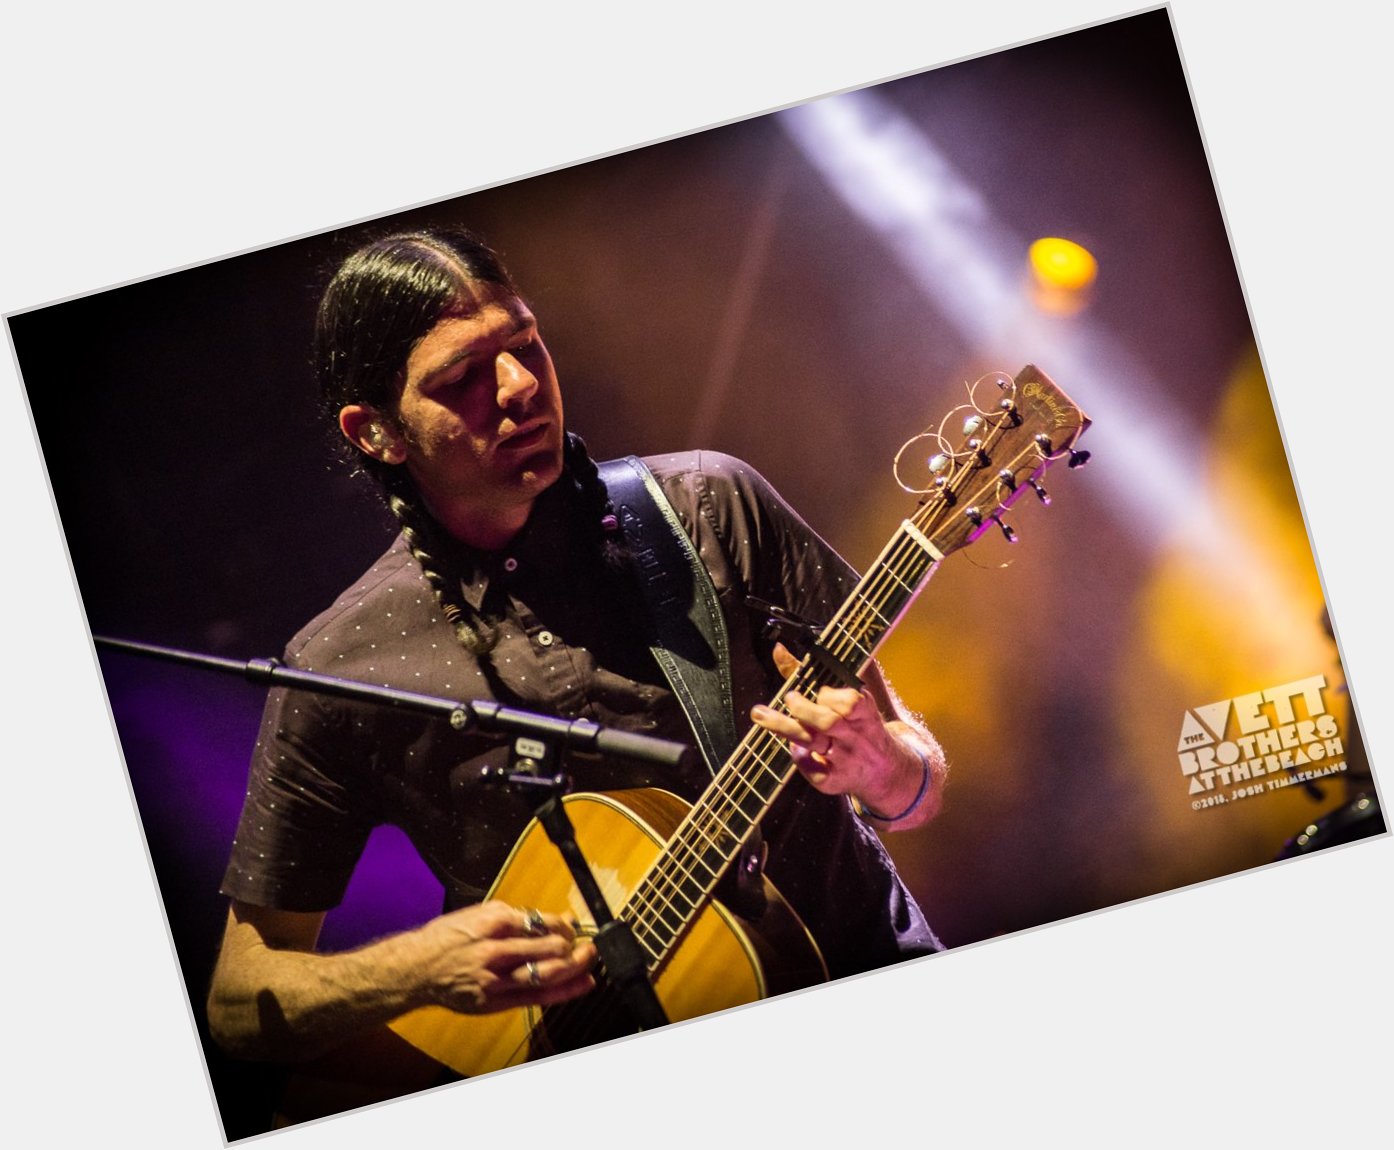 Join us in wishing a very Happy Birthday to Seth Avett of 